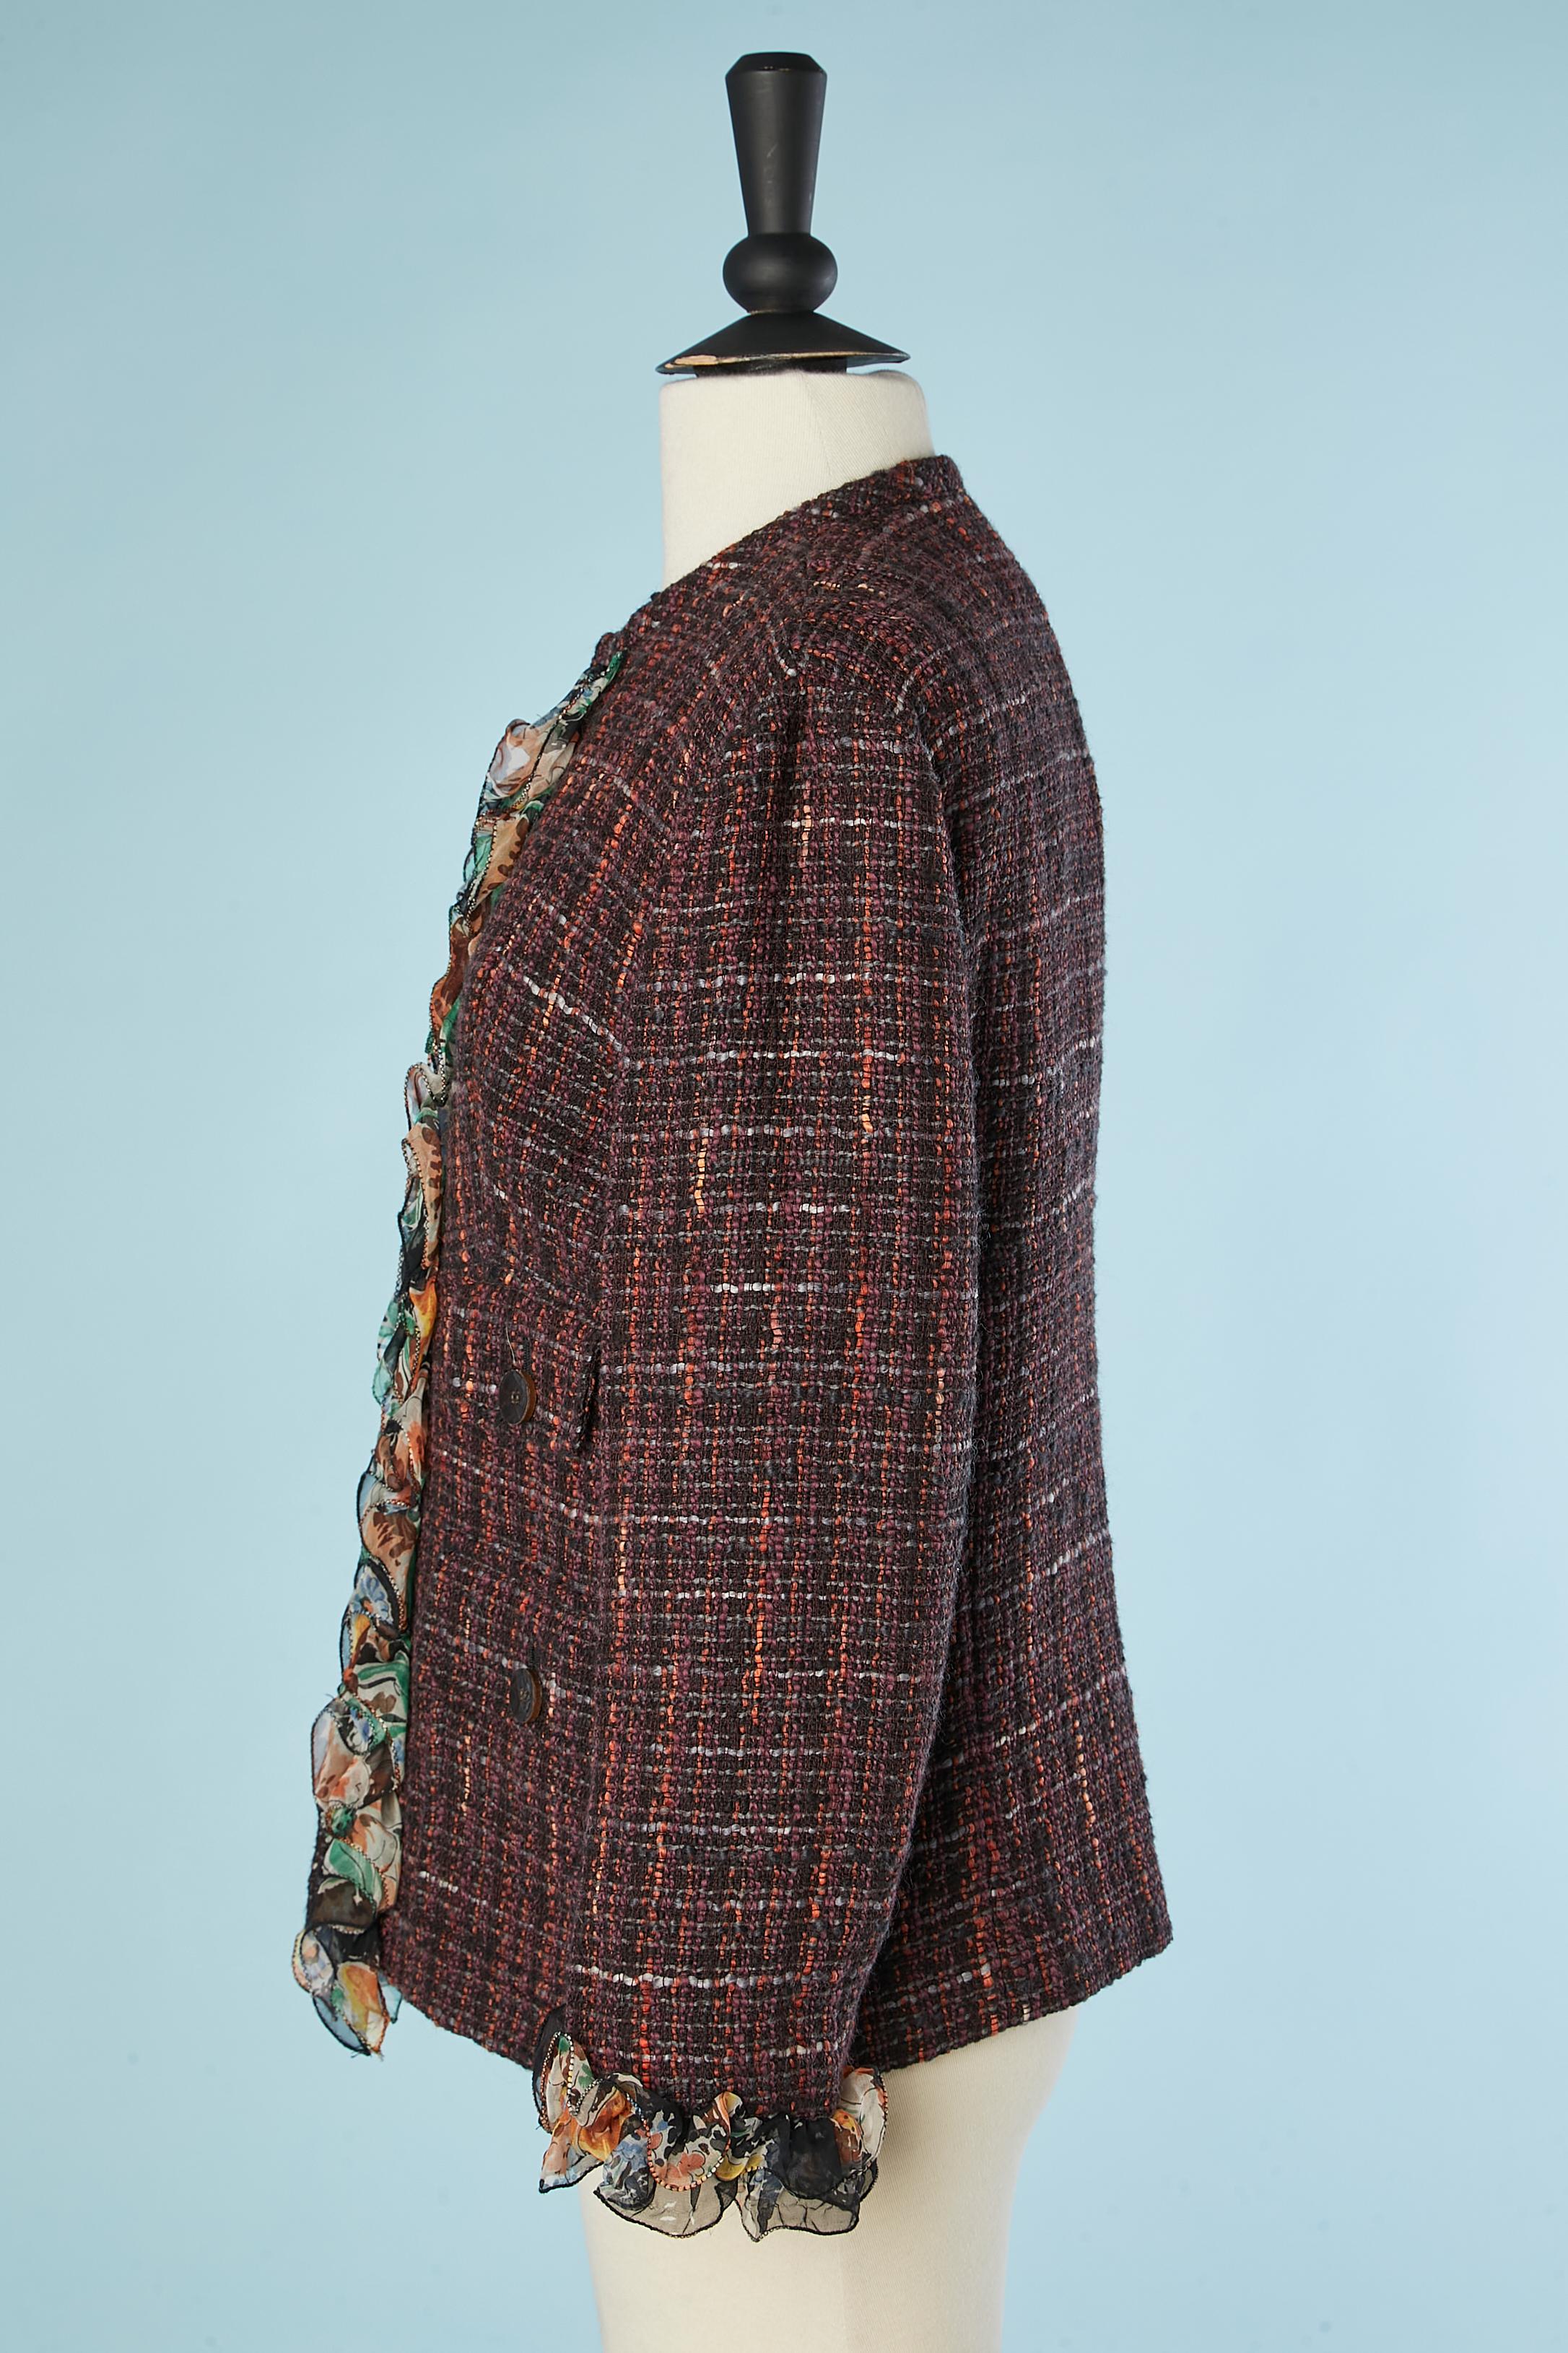 Edge to edge tweed jacket with flower printed chiffon ruffles Dolce & Gabbana  In Excellent Condition For Sale In Saint-Ouen-Sur-Seine, FR